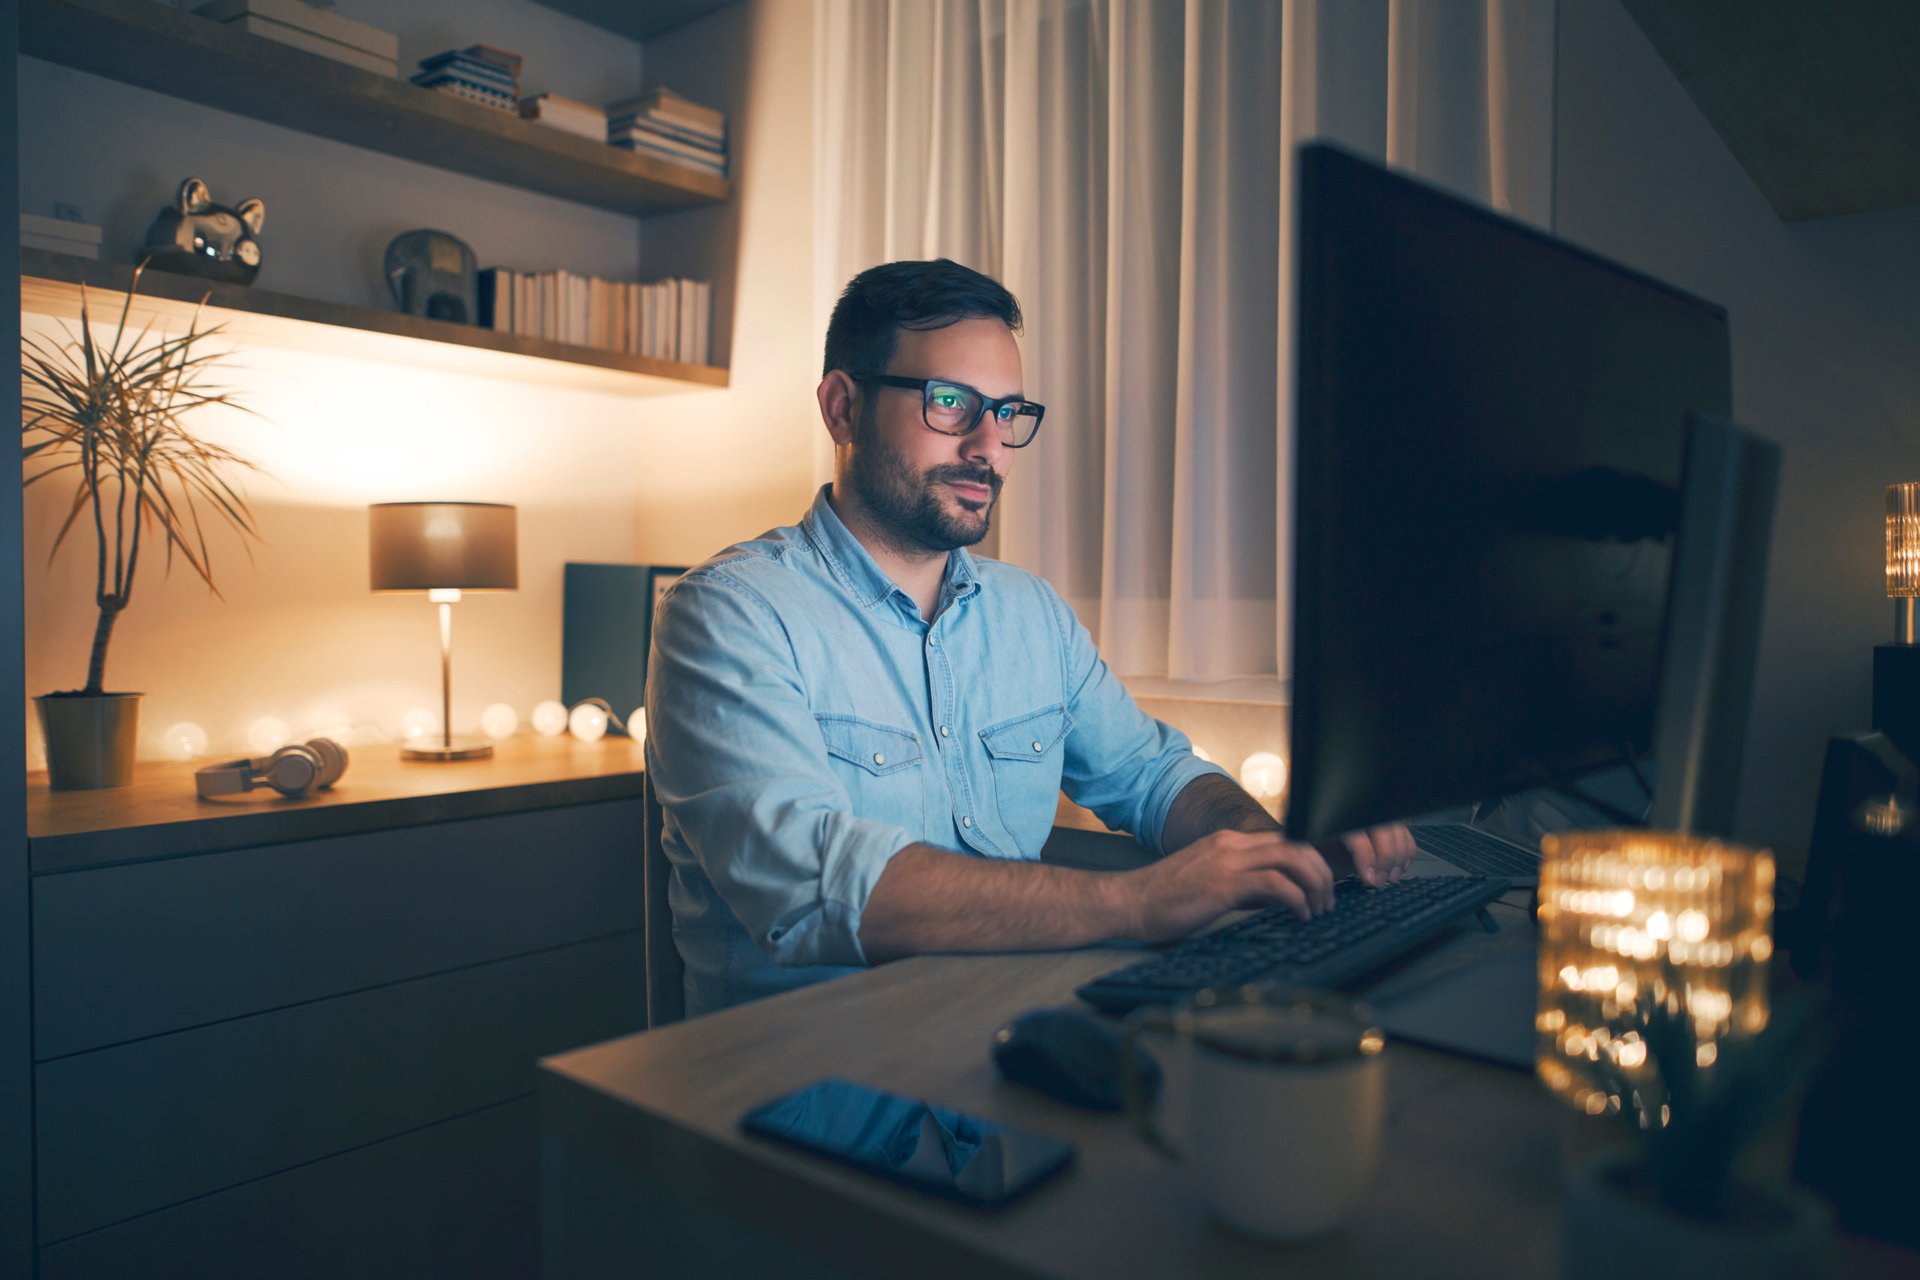 Man working remotely on computer at night